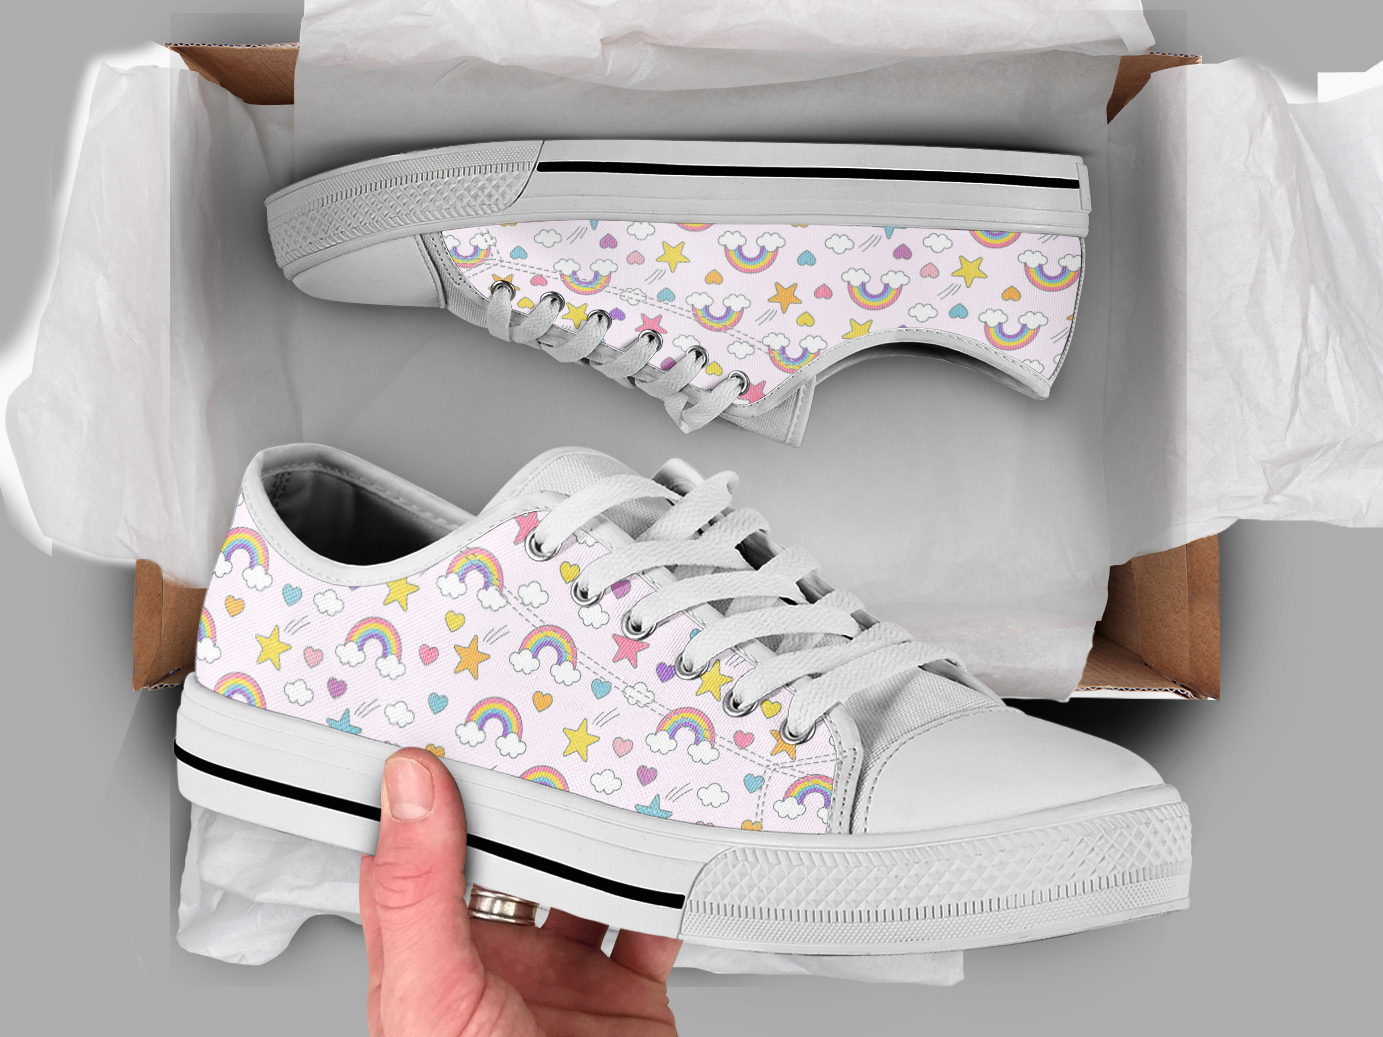 Sweets Rainbow Shoes | Custom Low Tops Sneakers For Kids & Adults